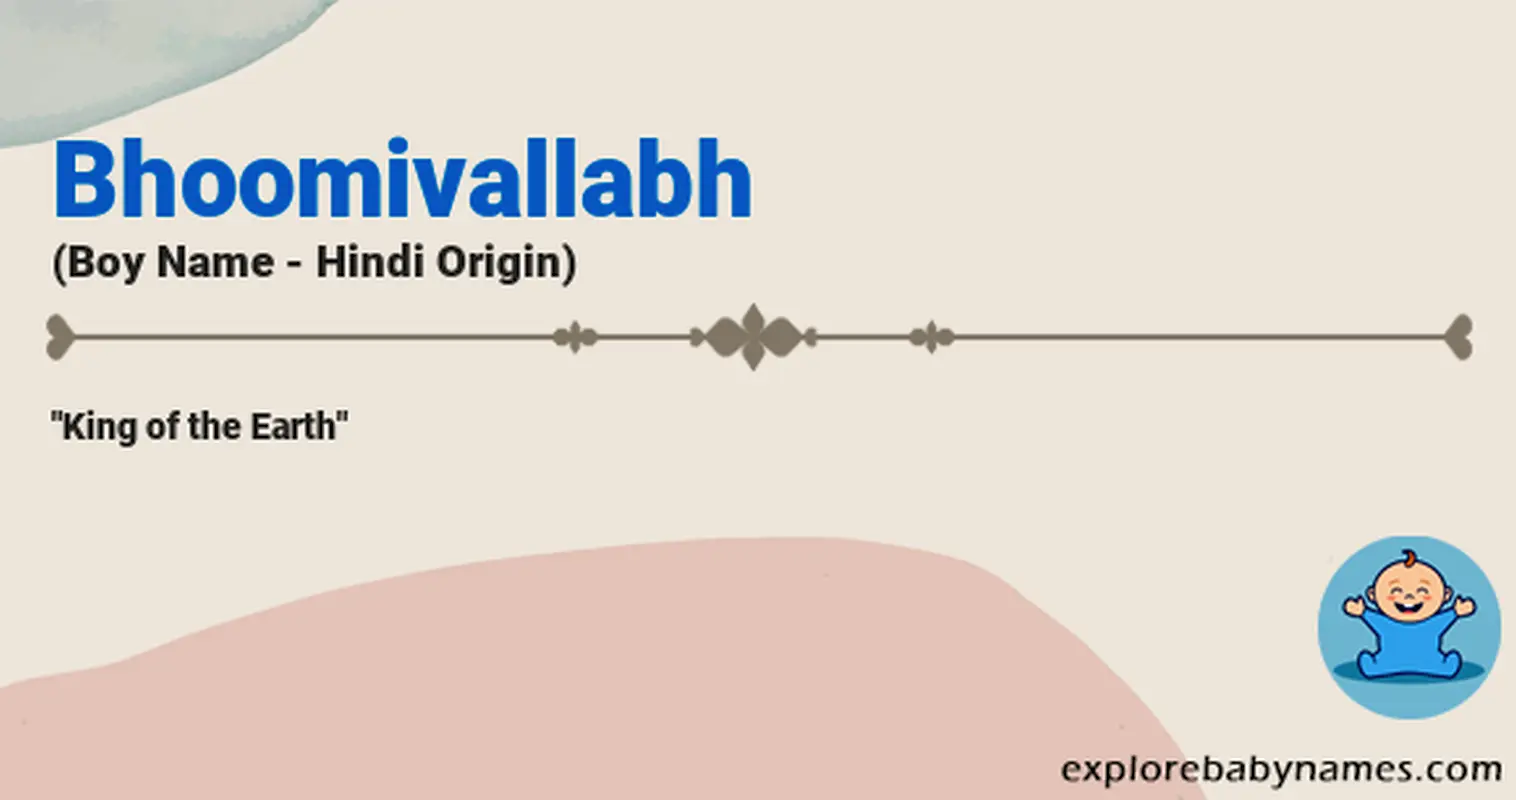 Meaning of Bhoomivallabh